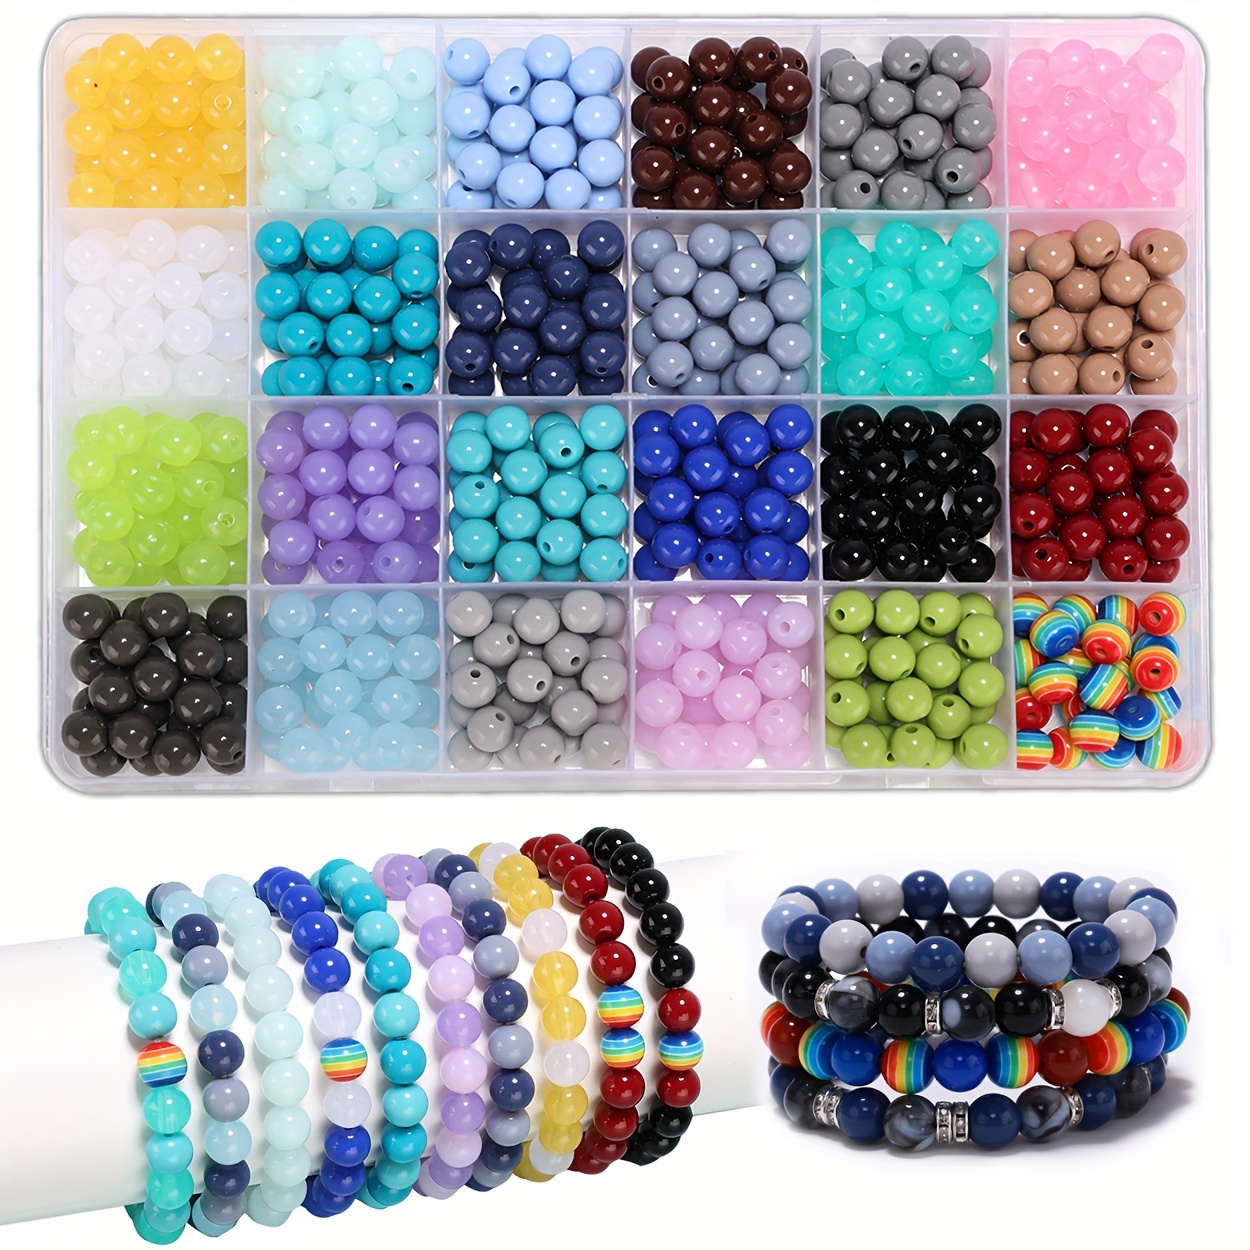 300pcs Letter and Number Beads for Bracelets DIY Jewelry Making Supplies  Kits, 4x7mm Mixed Plastic Round Acrylic Black Letters Clay Bead for Girls